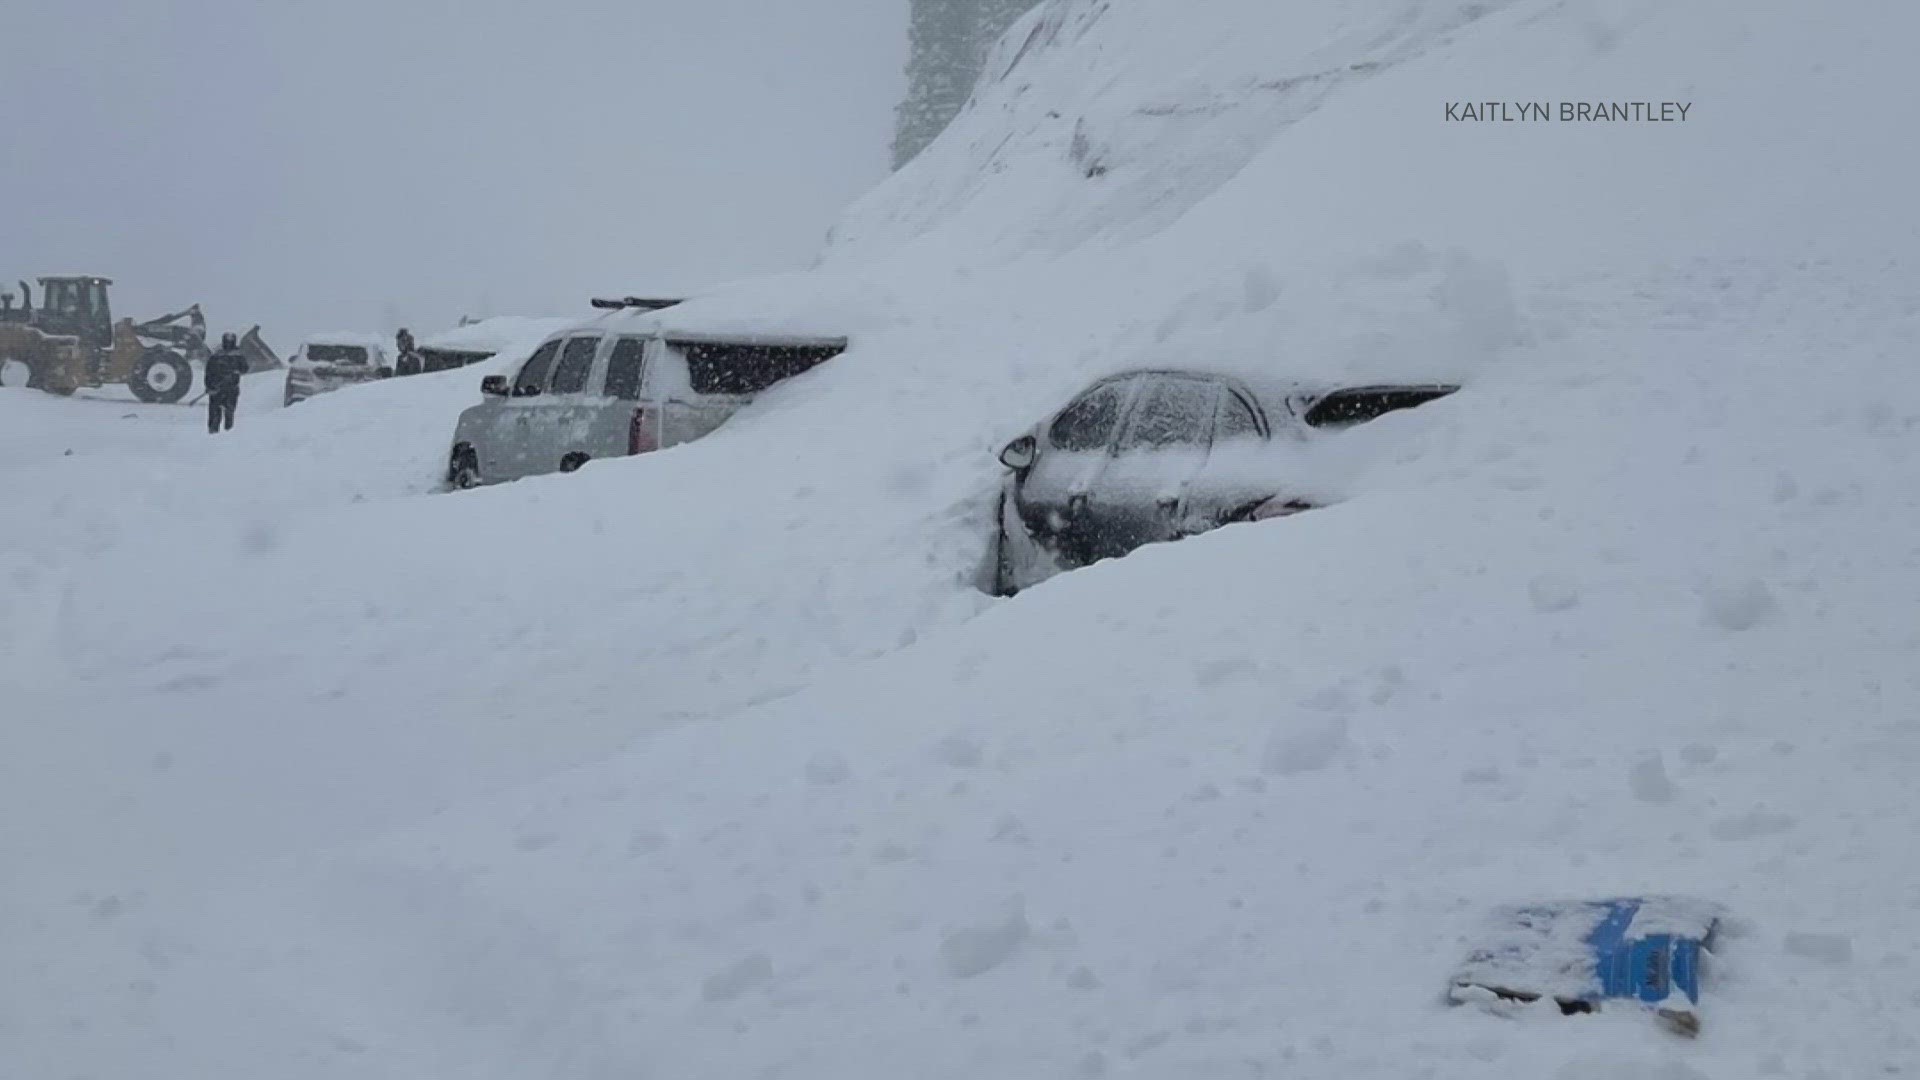 Ten cars were caught in the avalanche Sunday morning on Berthoud Pass, CDOT said. No injuries were reported.